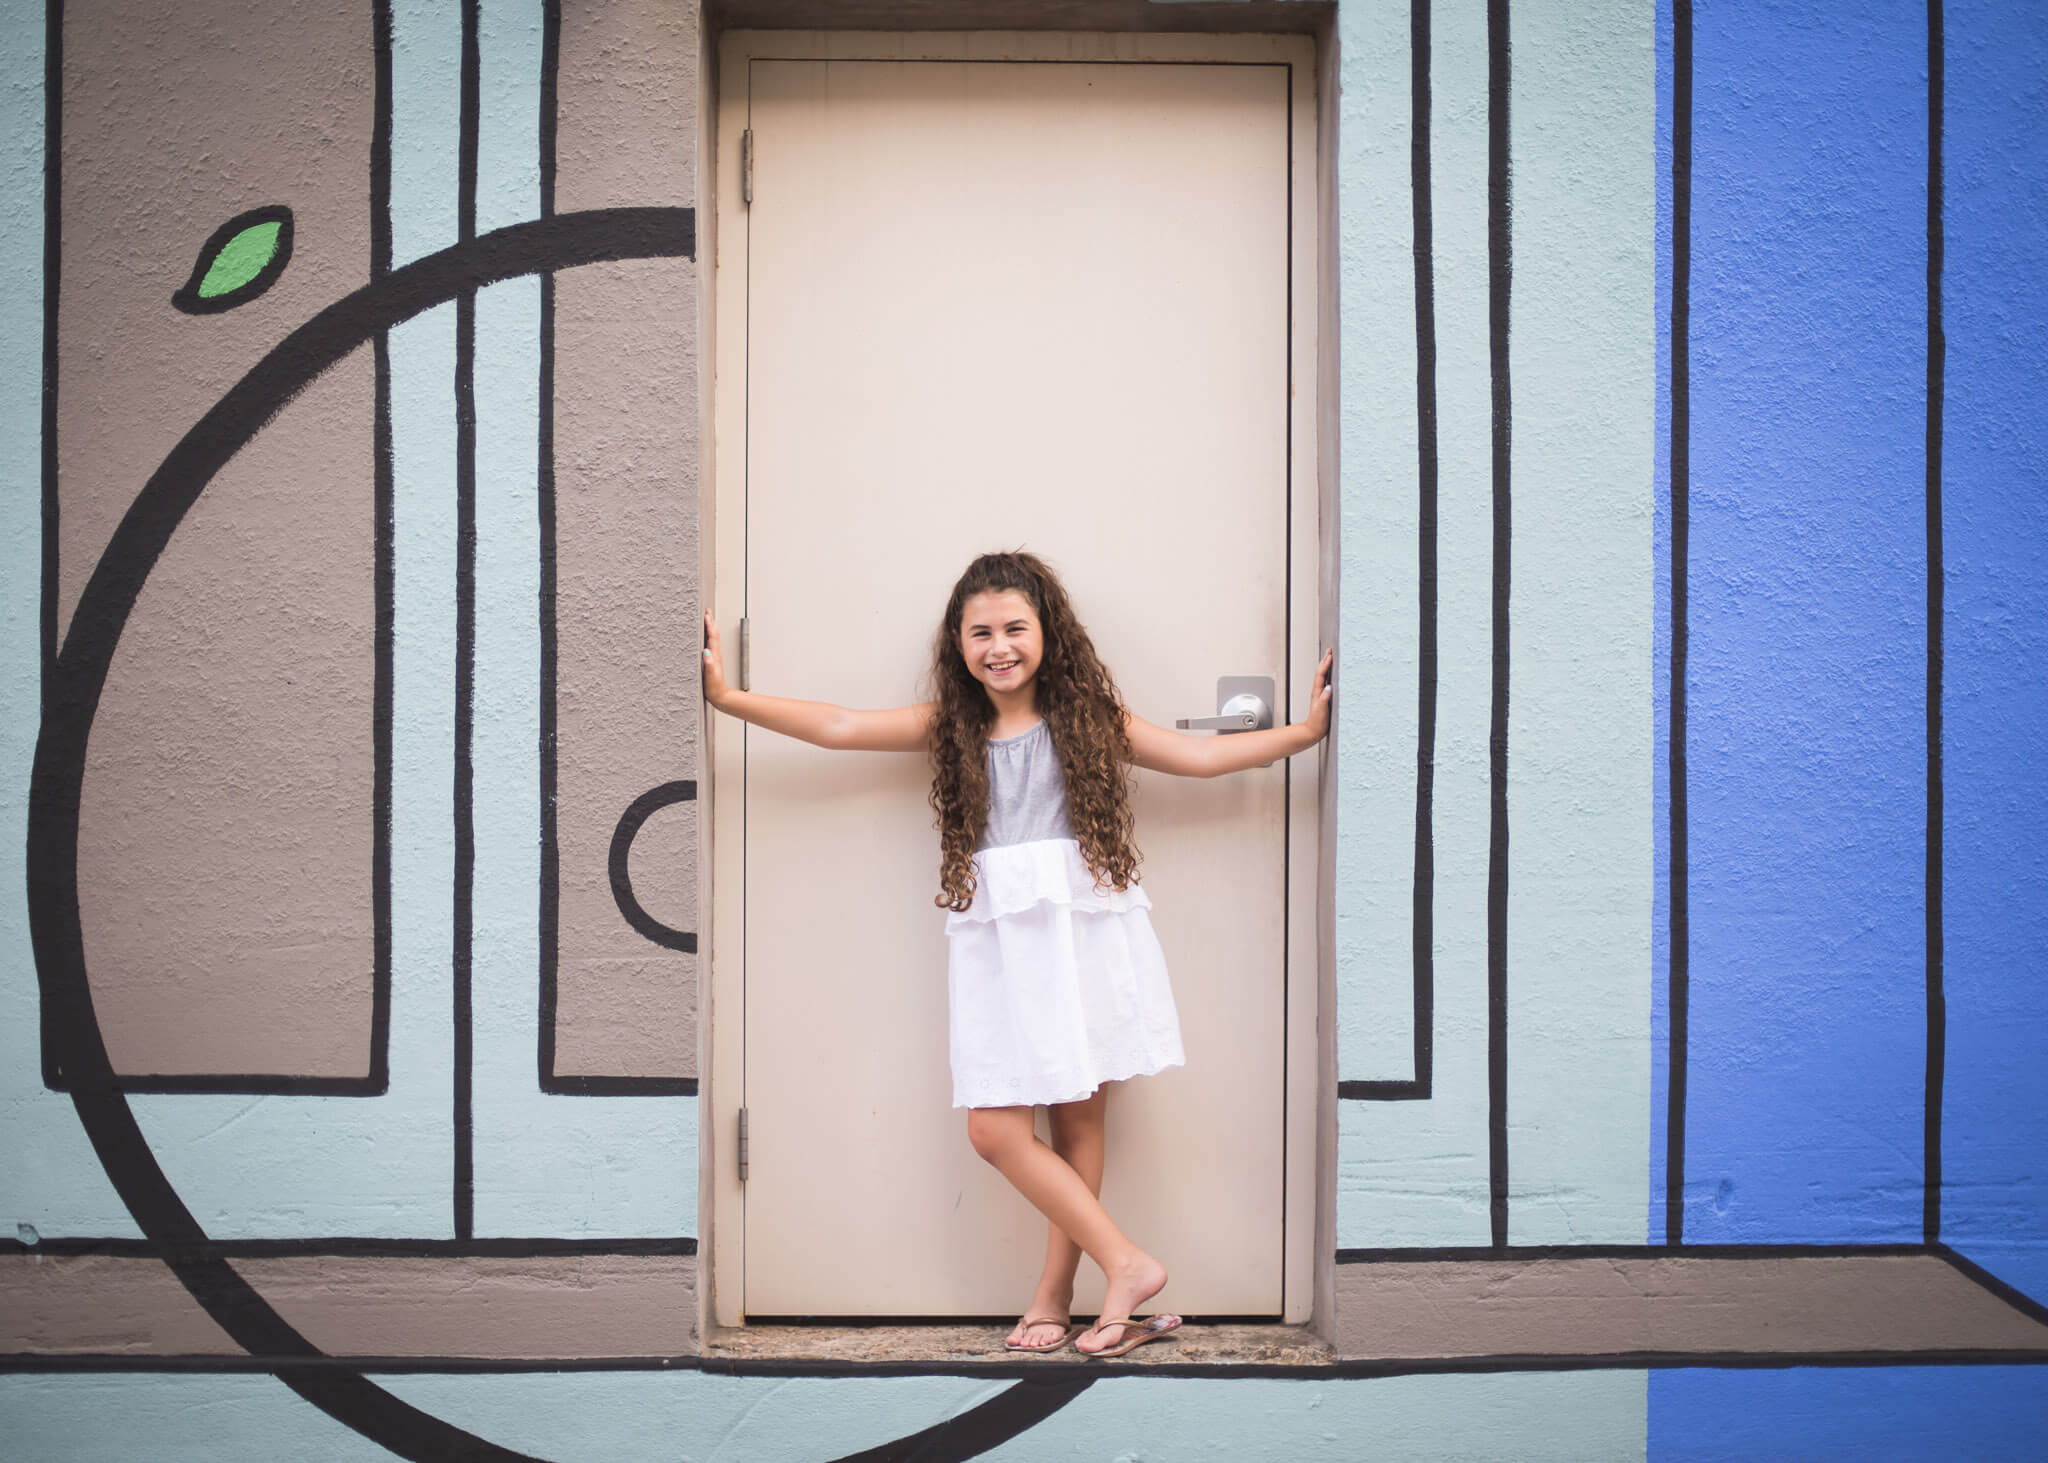 mural backdrop for Children's photo session in downtown McKinney